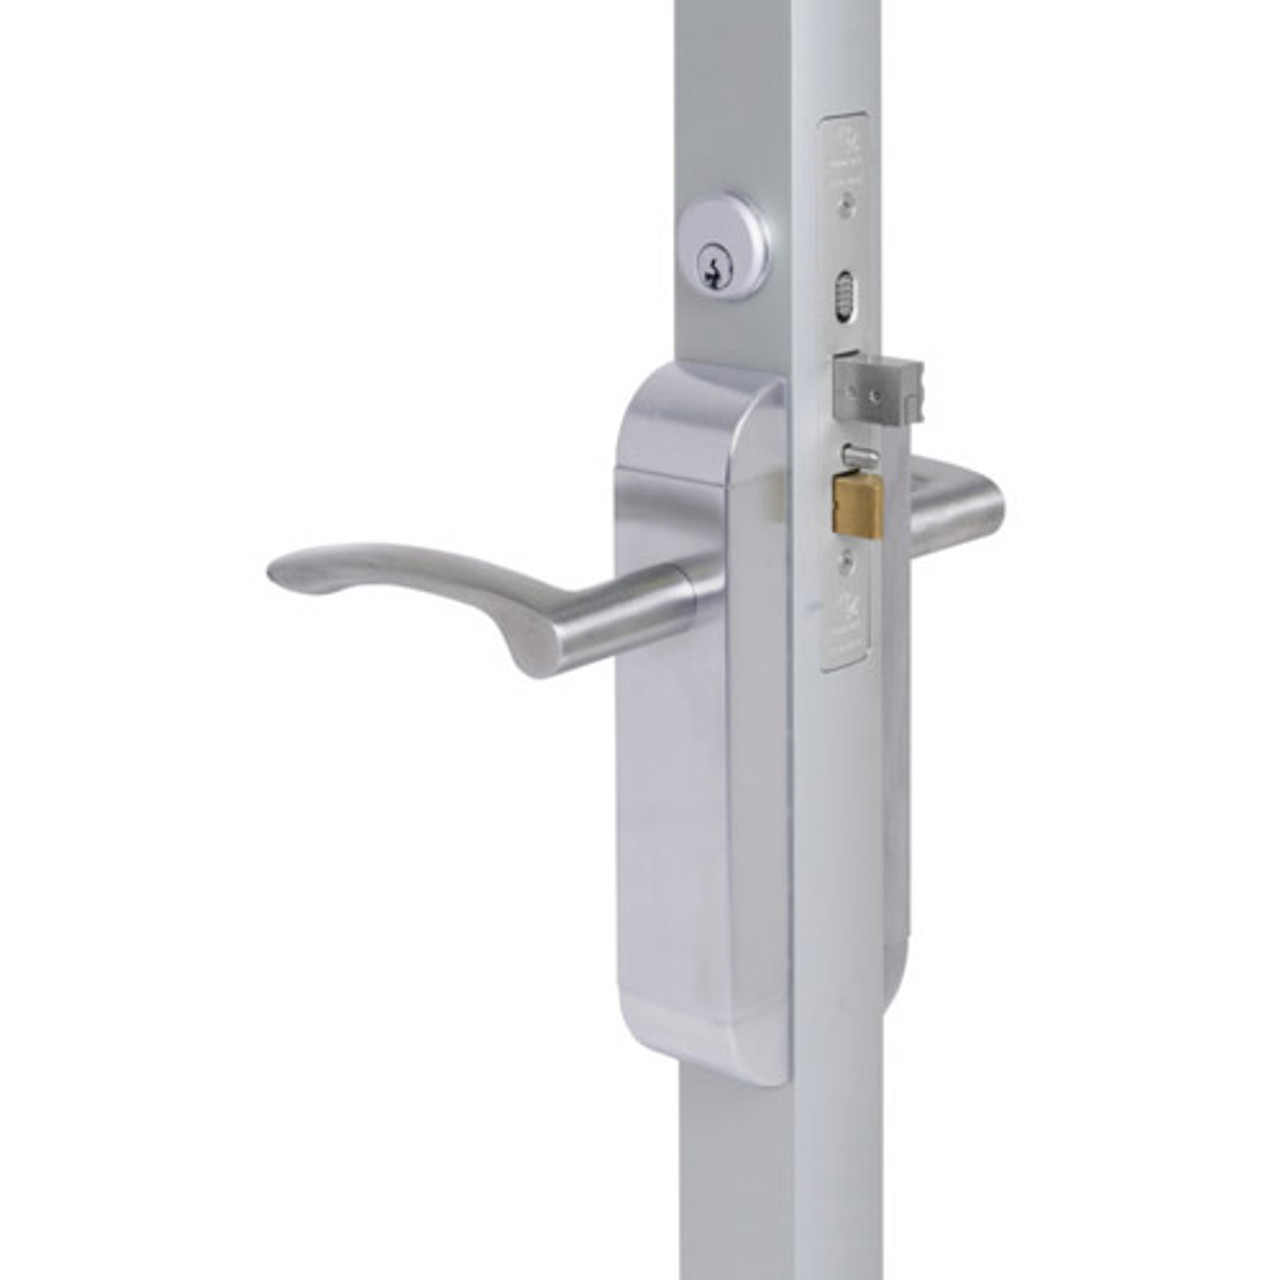 2290-411-203-32 Adams Rite Dual Force Interconnected 2290 series Deadlock/Deadlatch in Bright Stainless